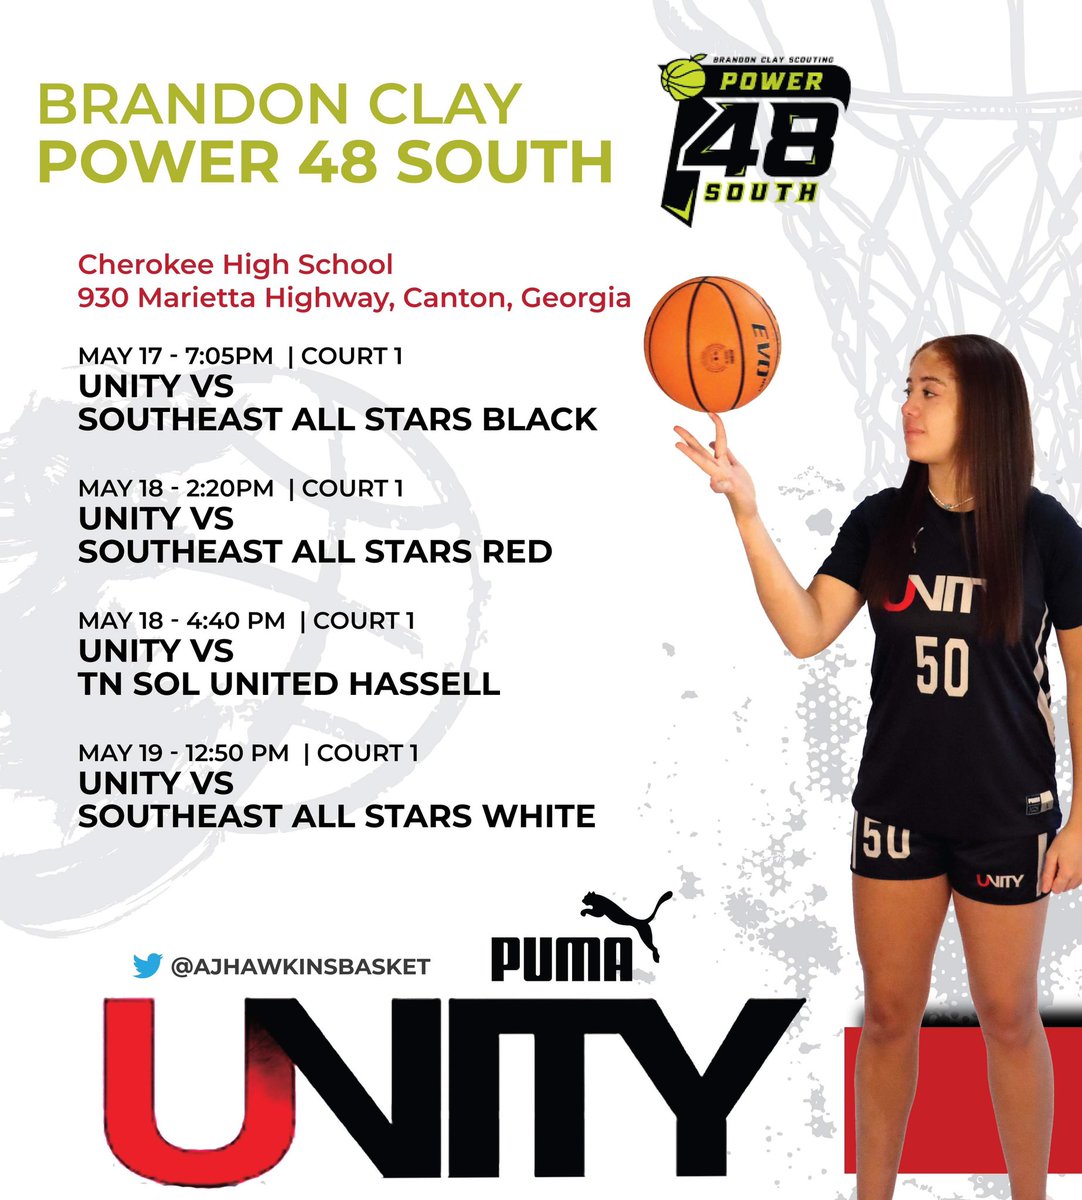 Catch me and @unitybasketbal1 THIS weekend in Georgia! ❤️ @Ajhawkinsbasket